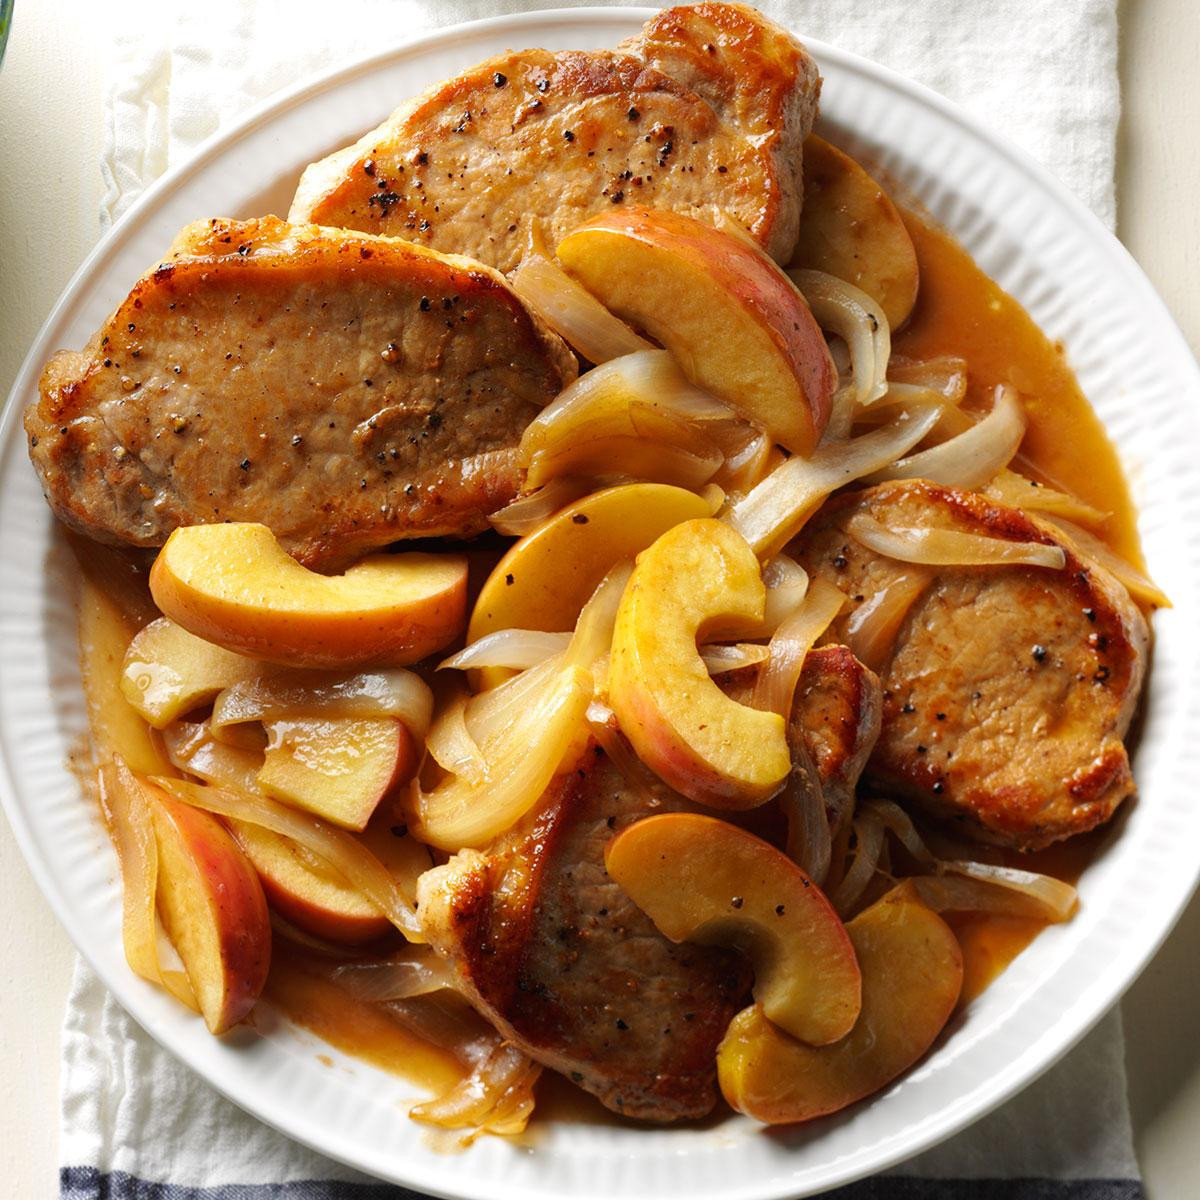 Recipes With Pork Chops
 Skillet Pork Chops with Apples & ion Recipe